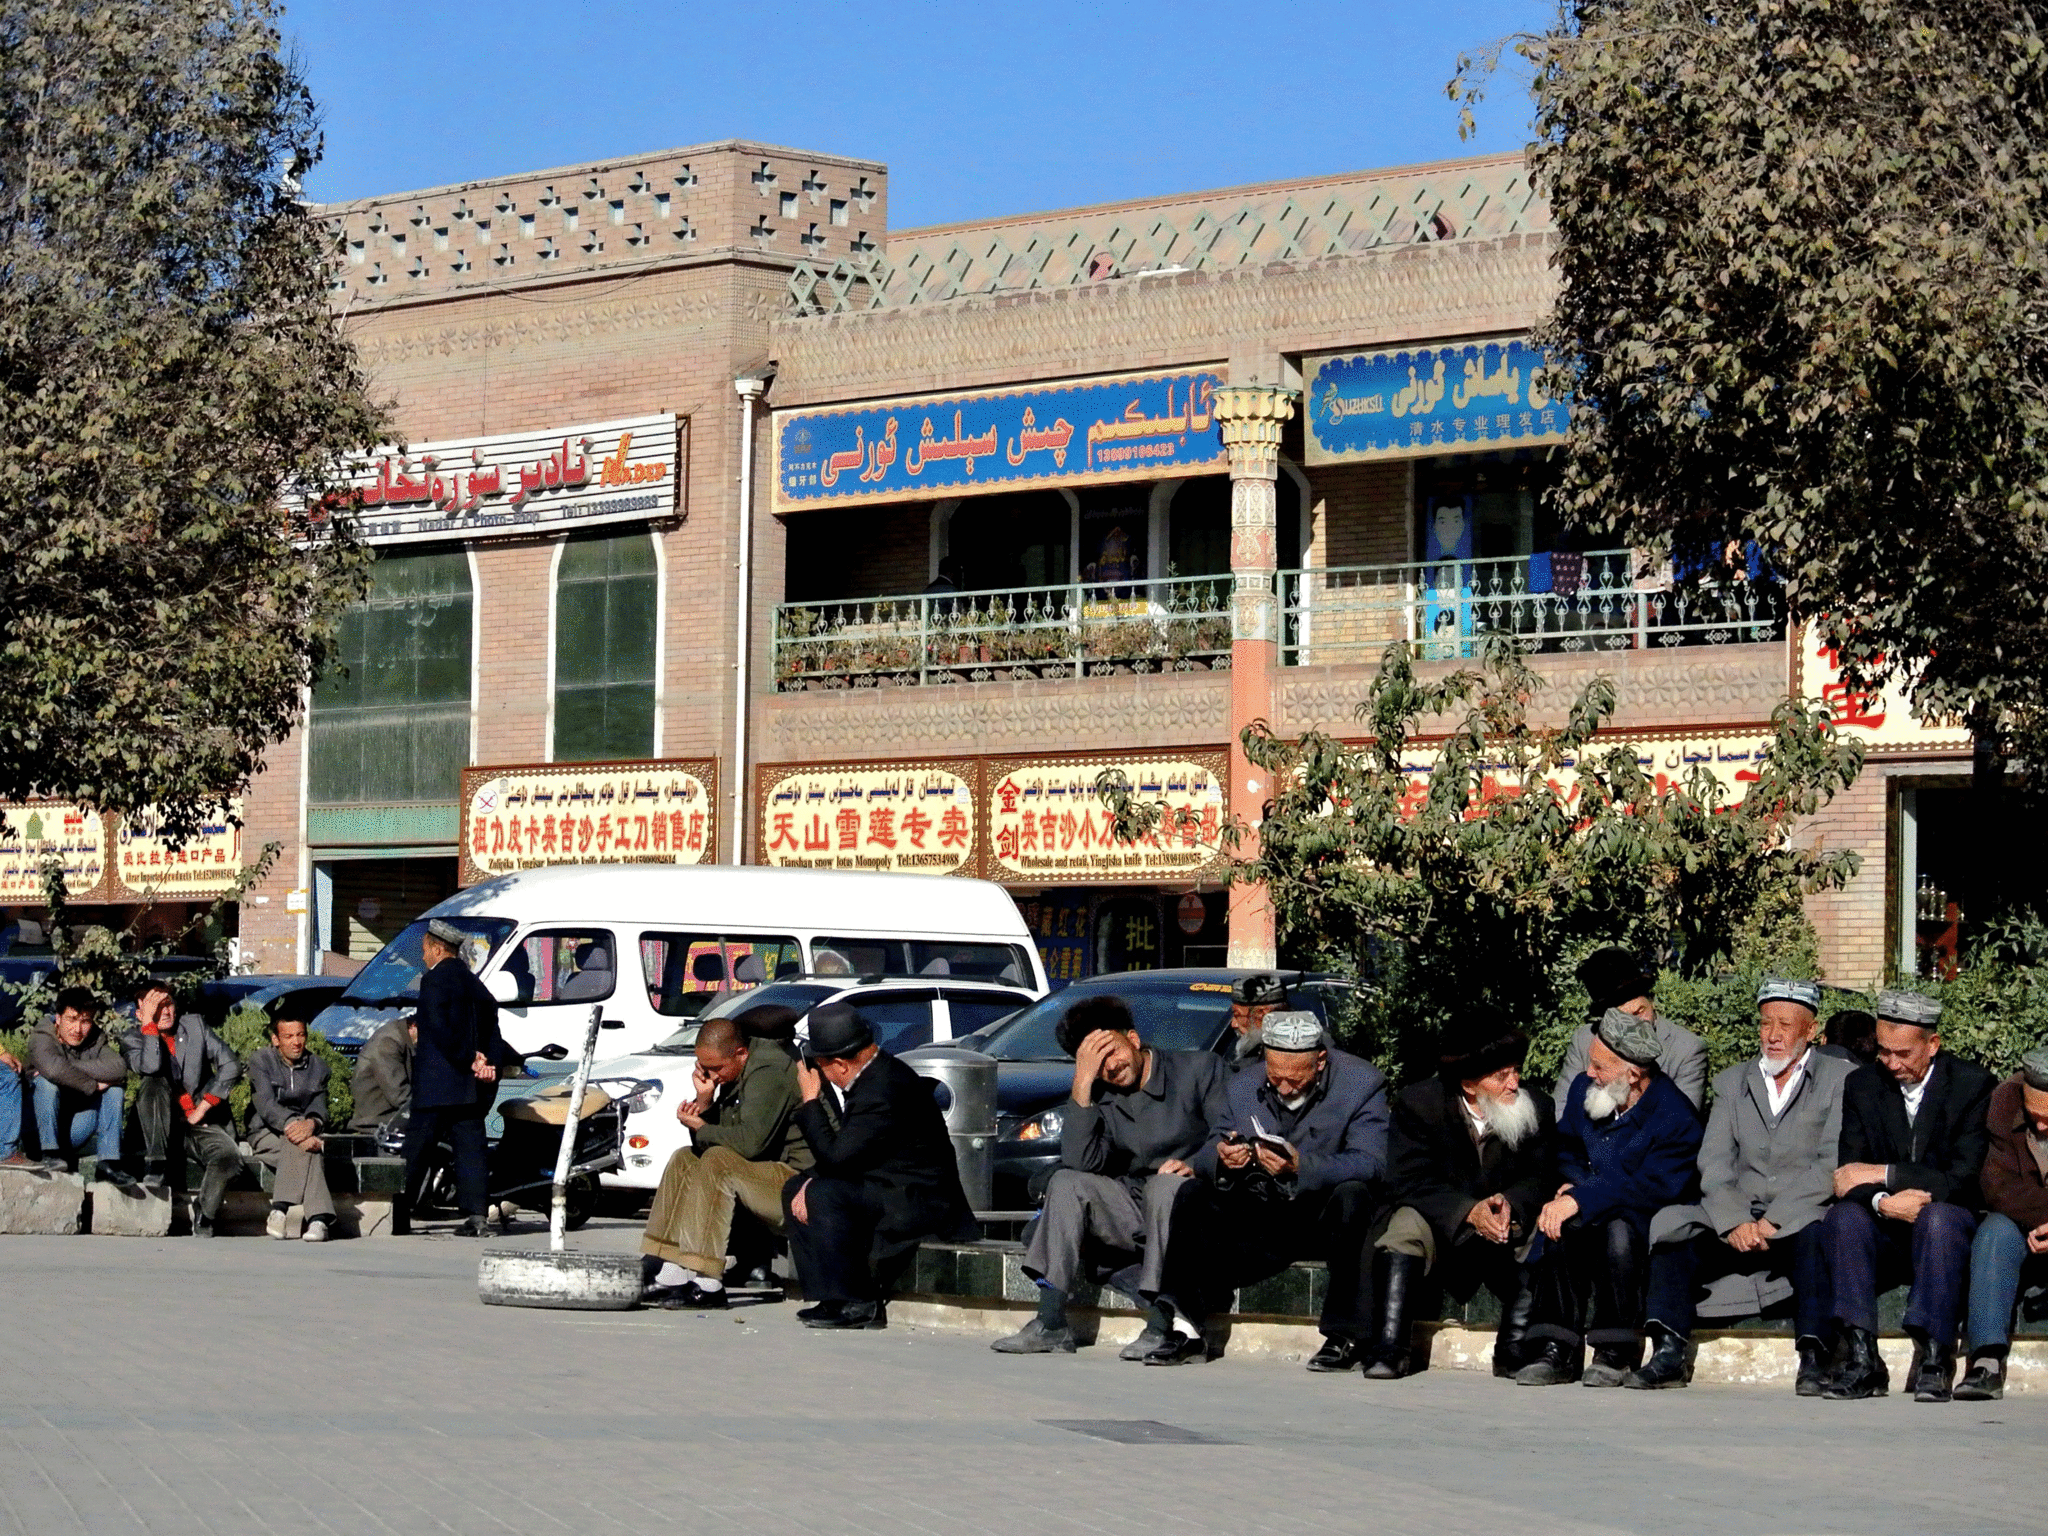 The Xinjiang region of China has experienced social unrest